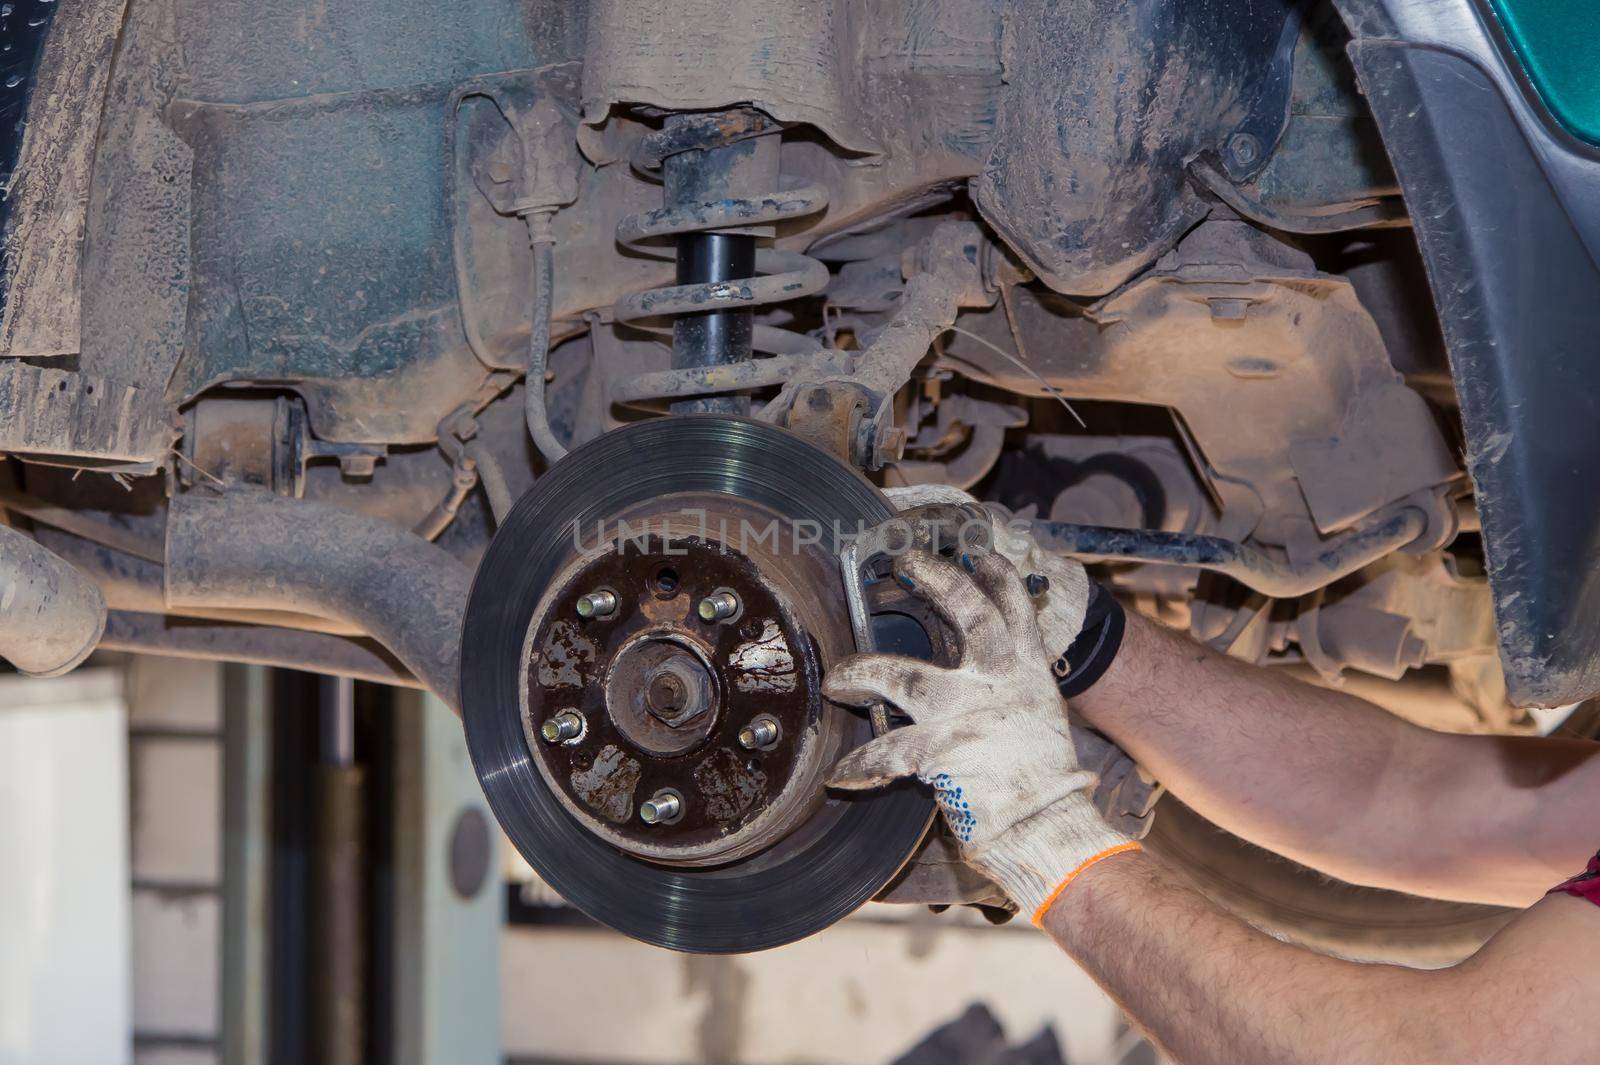 Gloved male hands install or remove the brake caliper of an old car. In the garage, a man changes parts on a vehicle. Small business concept, car repair and maintenance service. UHD 4K.